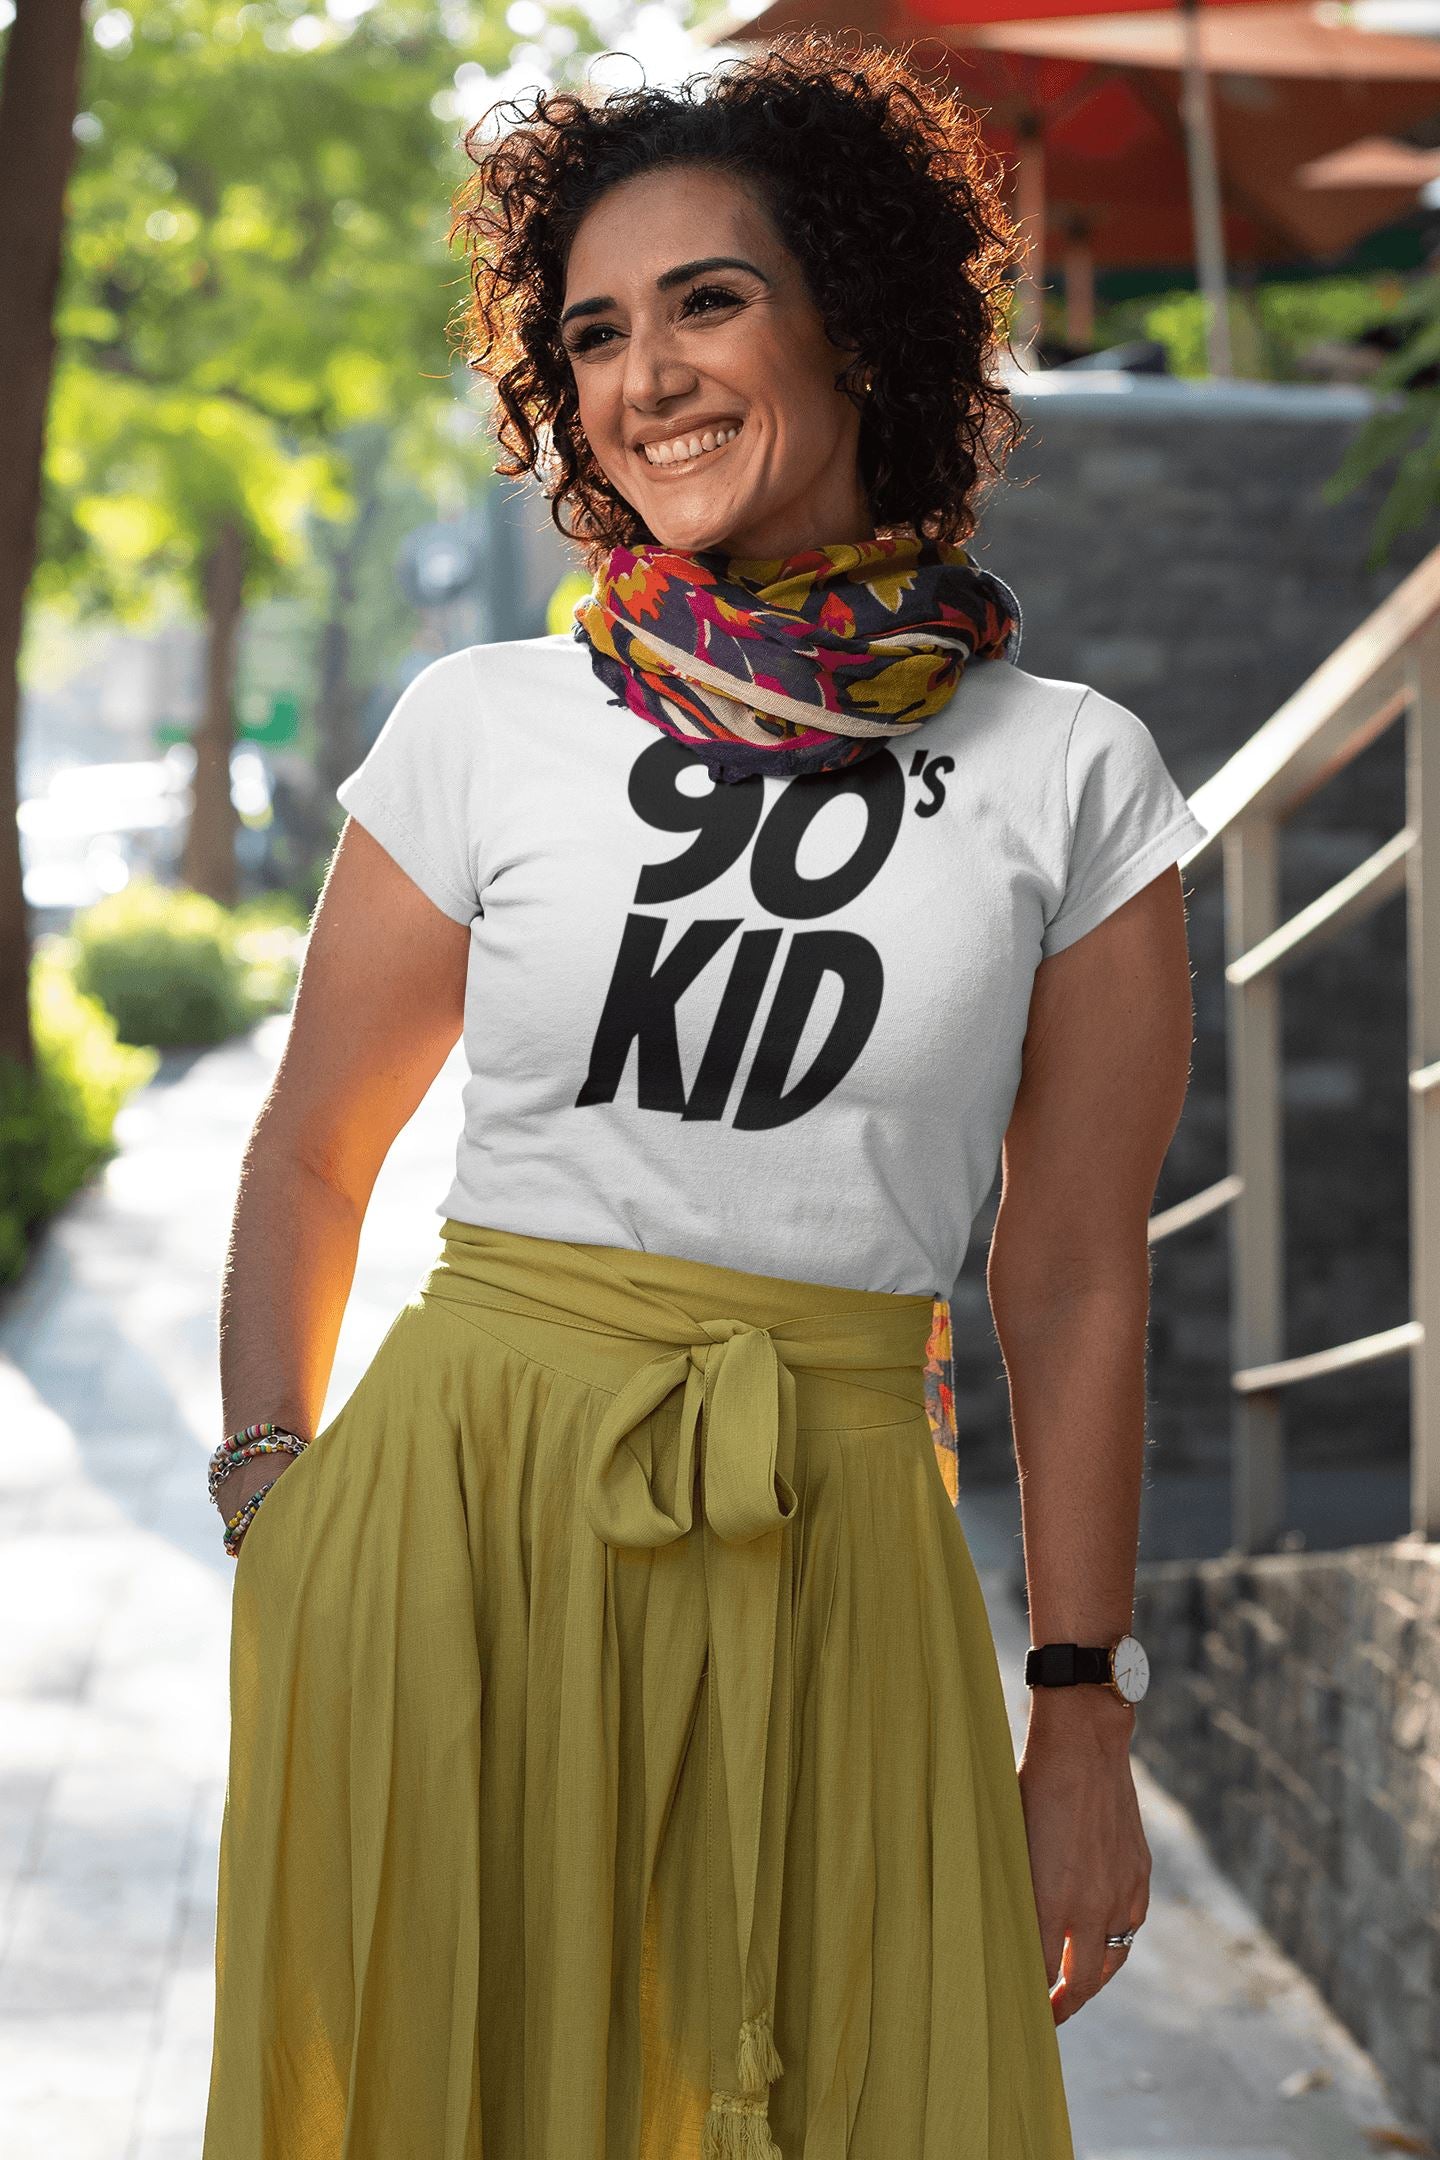 90"s Kid Special White T Shirt for Men and Women Born in the 90's - Catch My Drift India  clothing, couples, funny, general, made in india, parents, shirt, t shirt, trending, tshirt, white